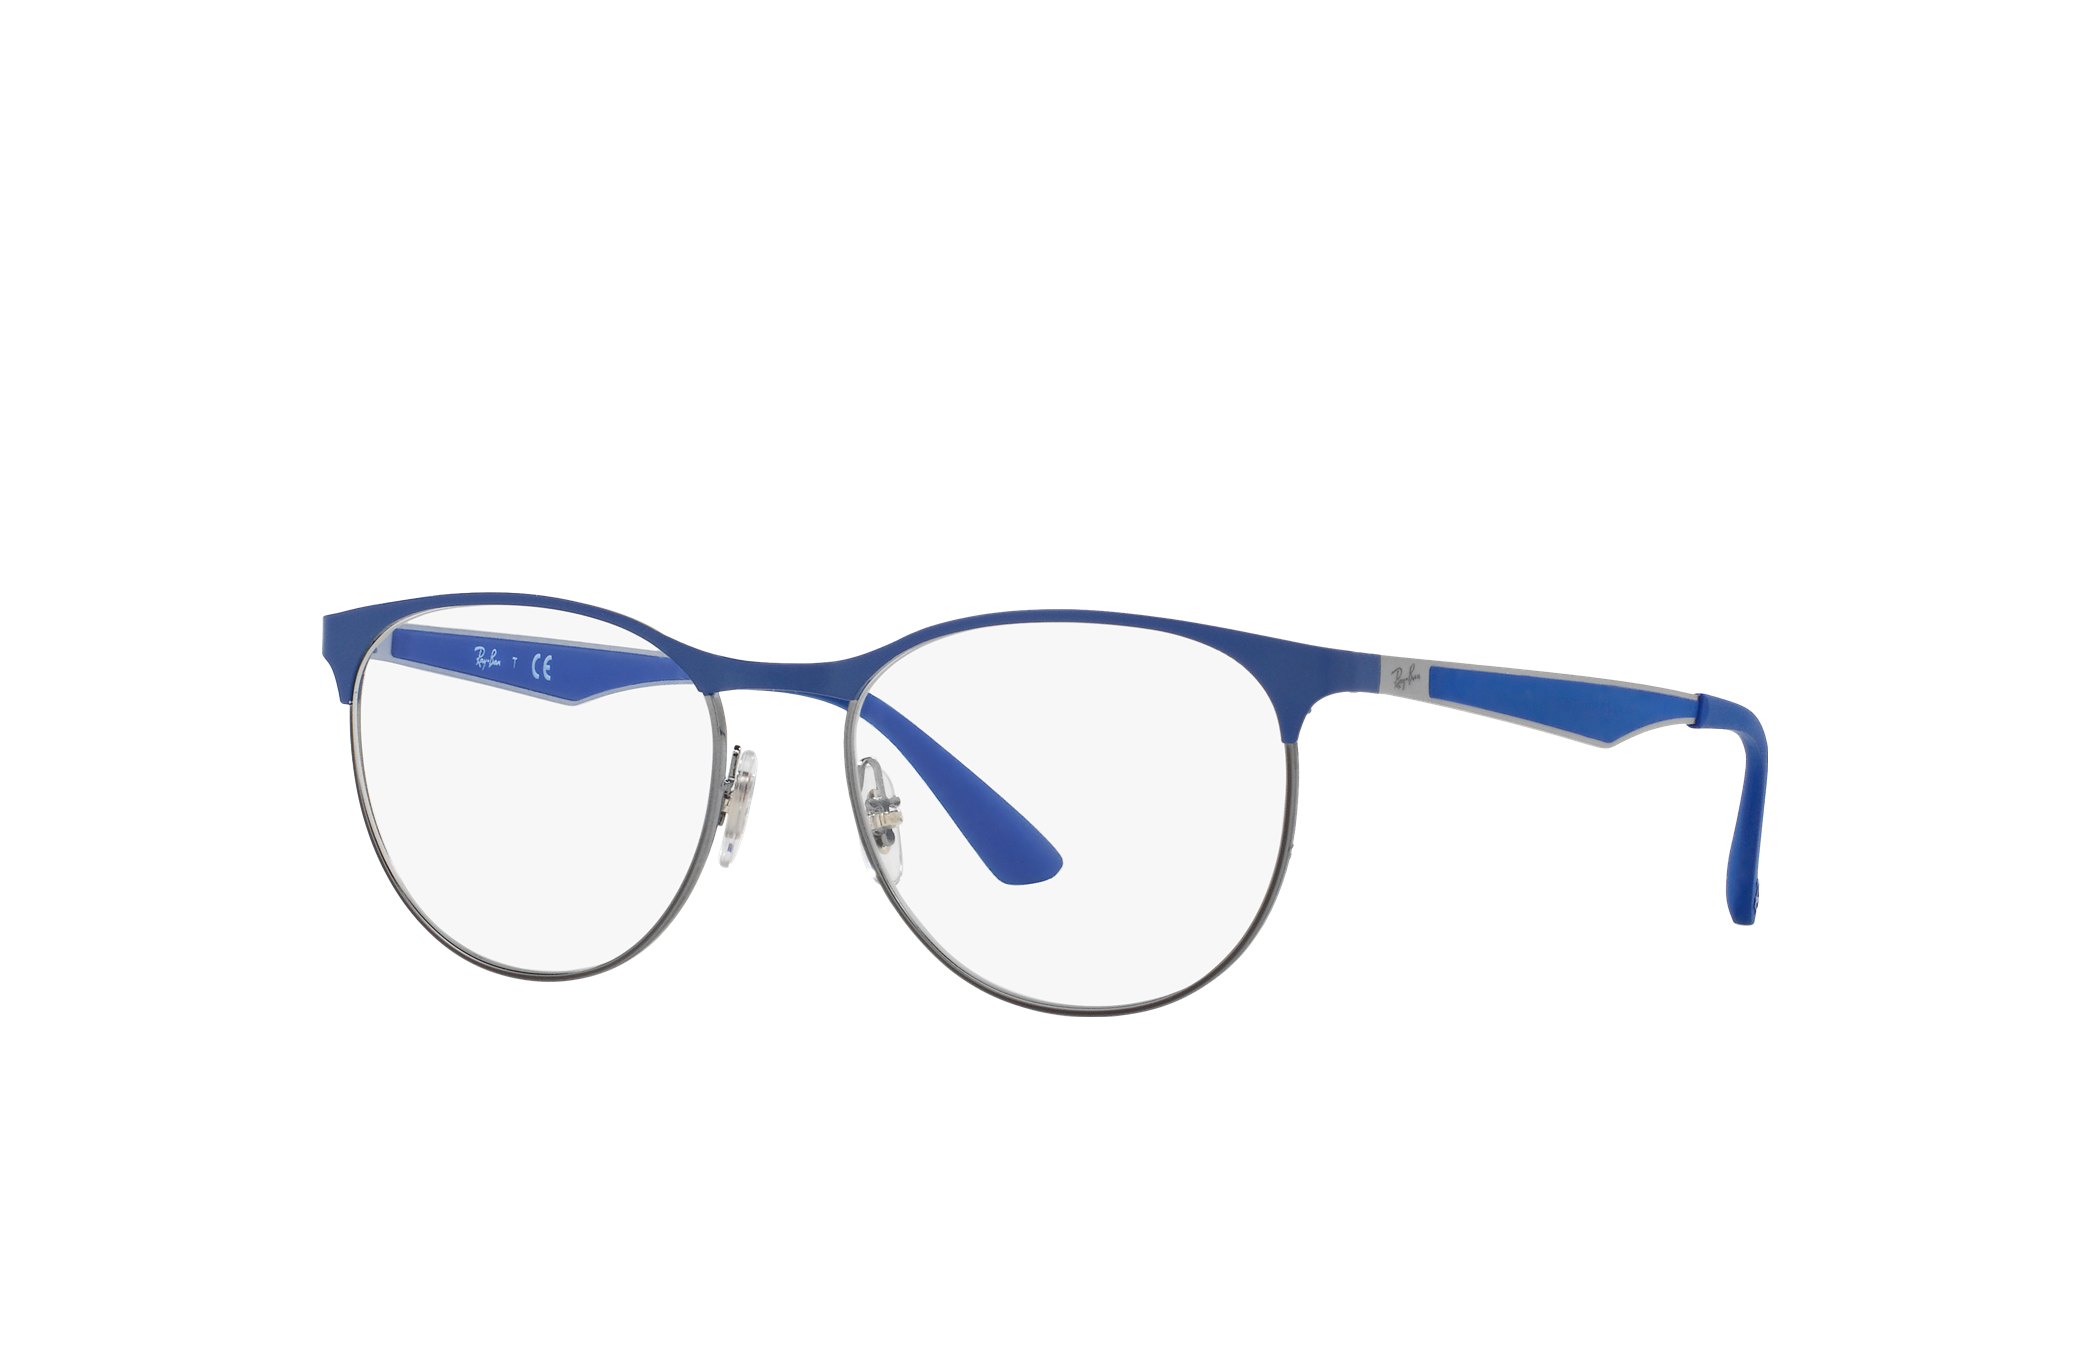 Rb6365 Eyeglasses with Blue Frame - RB6365 | Ray-Ban®